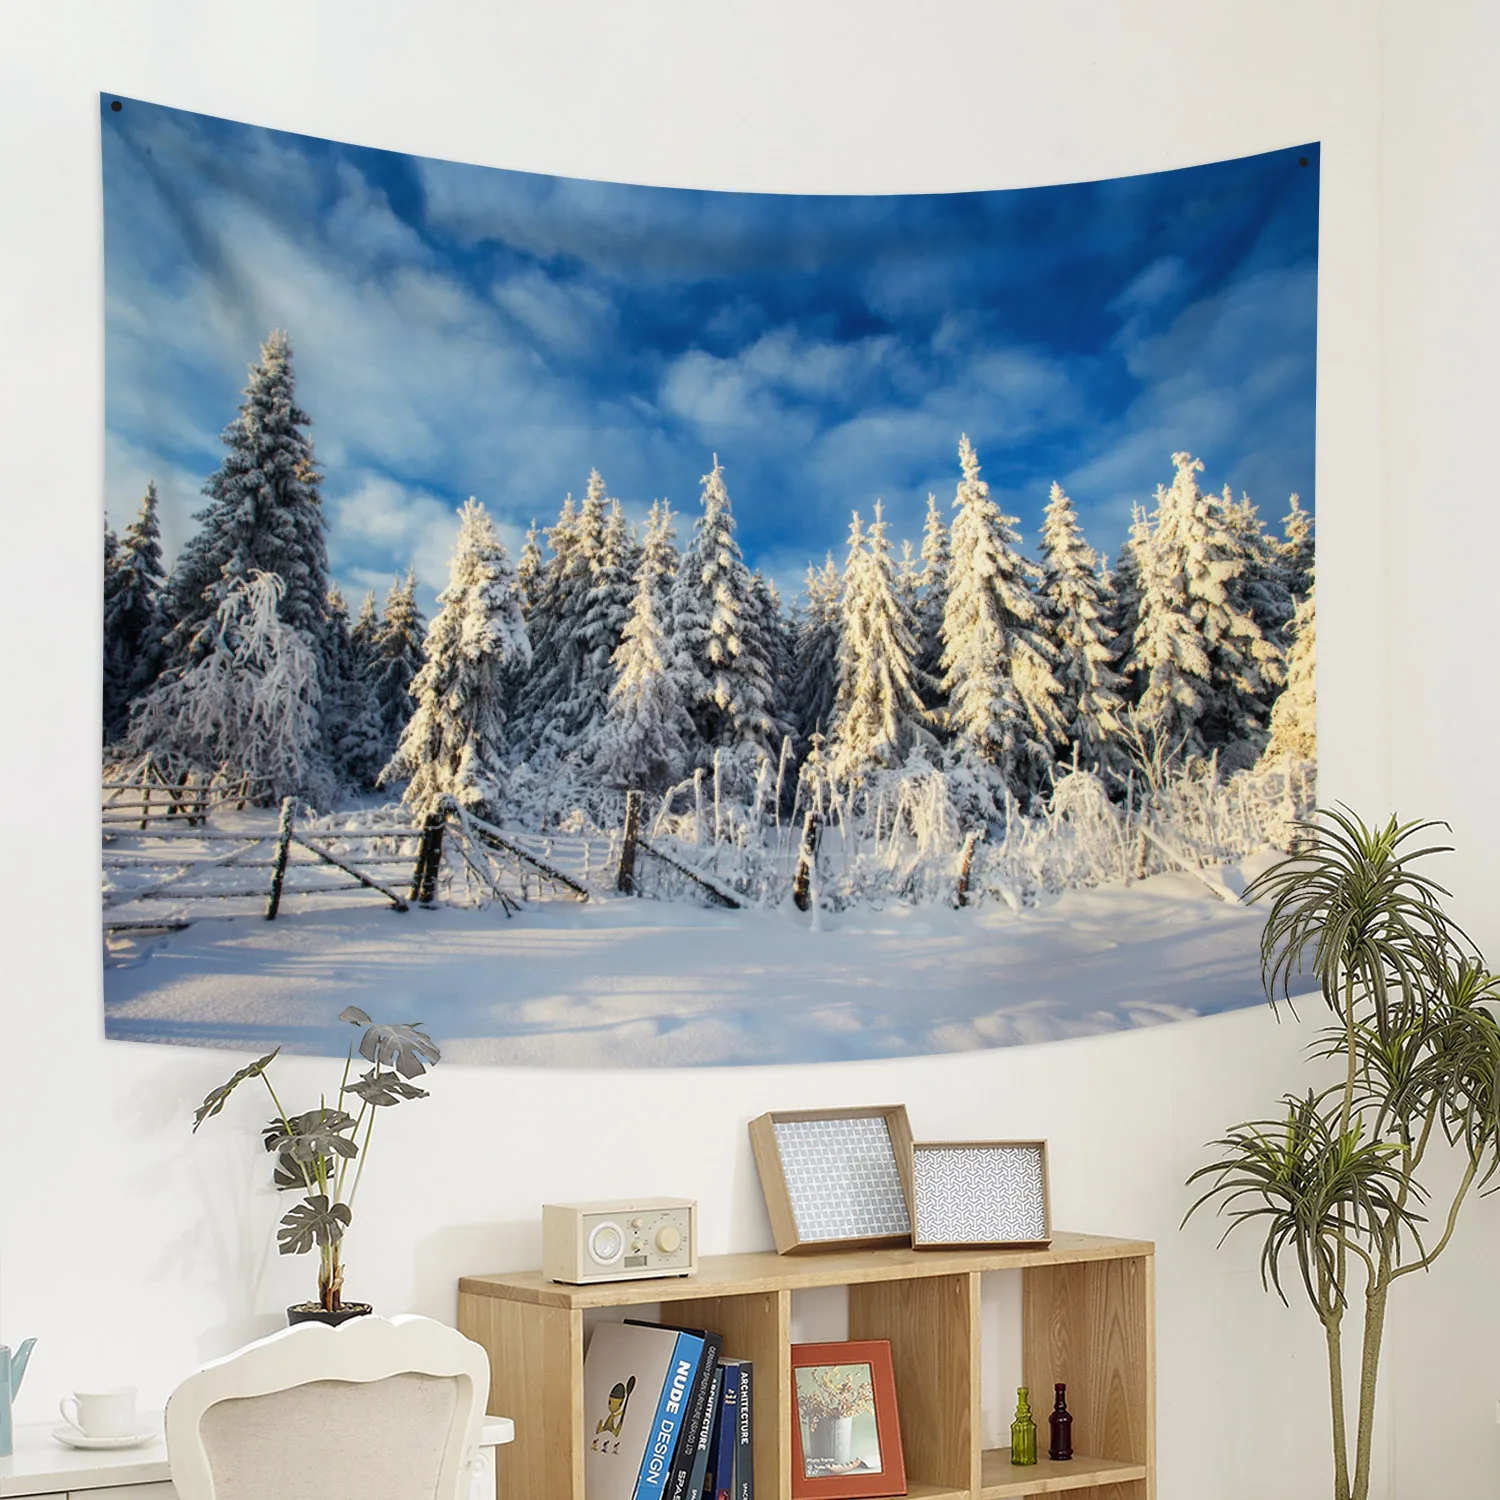 

Snow Forest Tapestry Trees in Snowy Jungle Wall Hanging Blanket Winter Scenery Tapestries for Bedroom Living Room Wall Decor